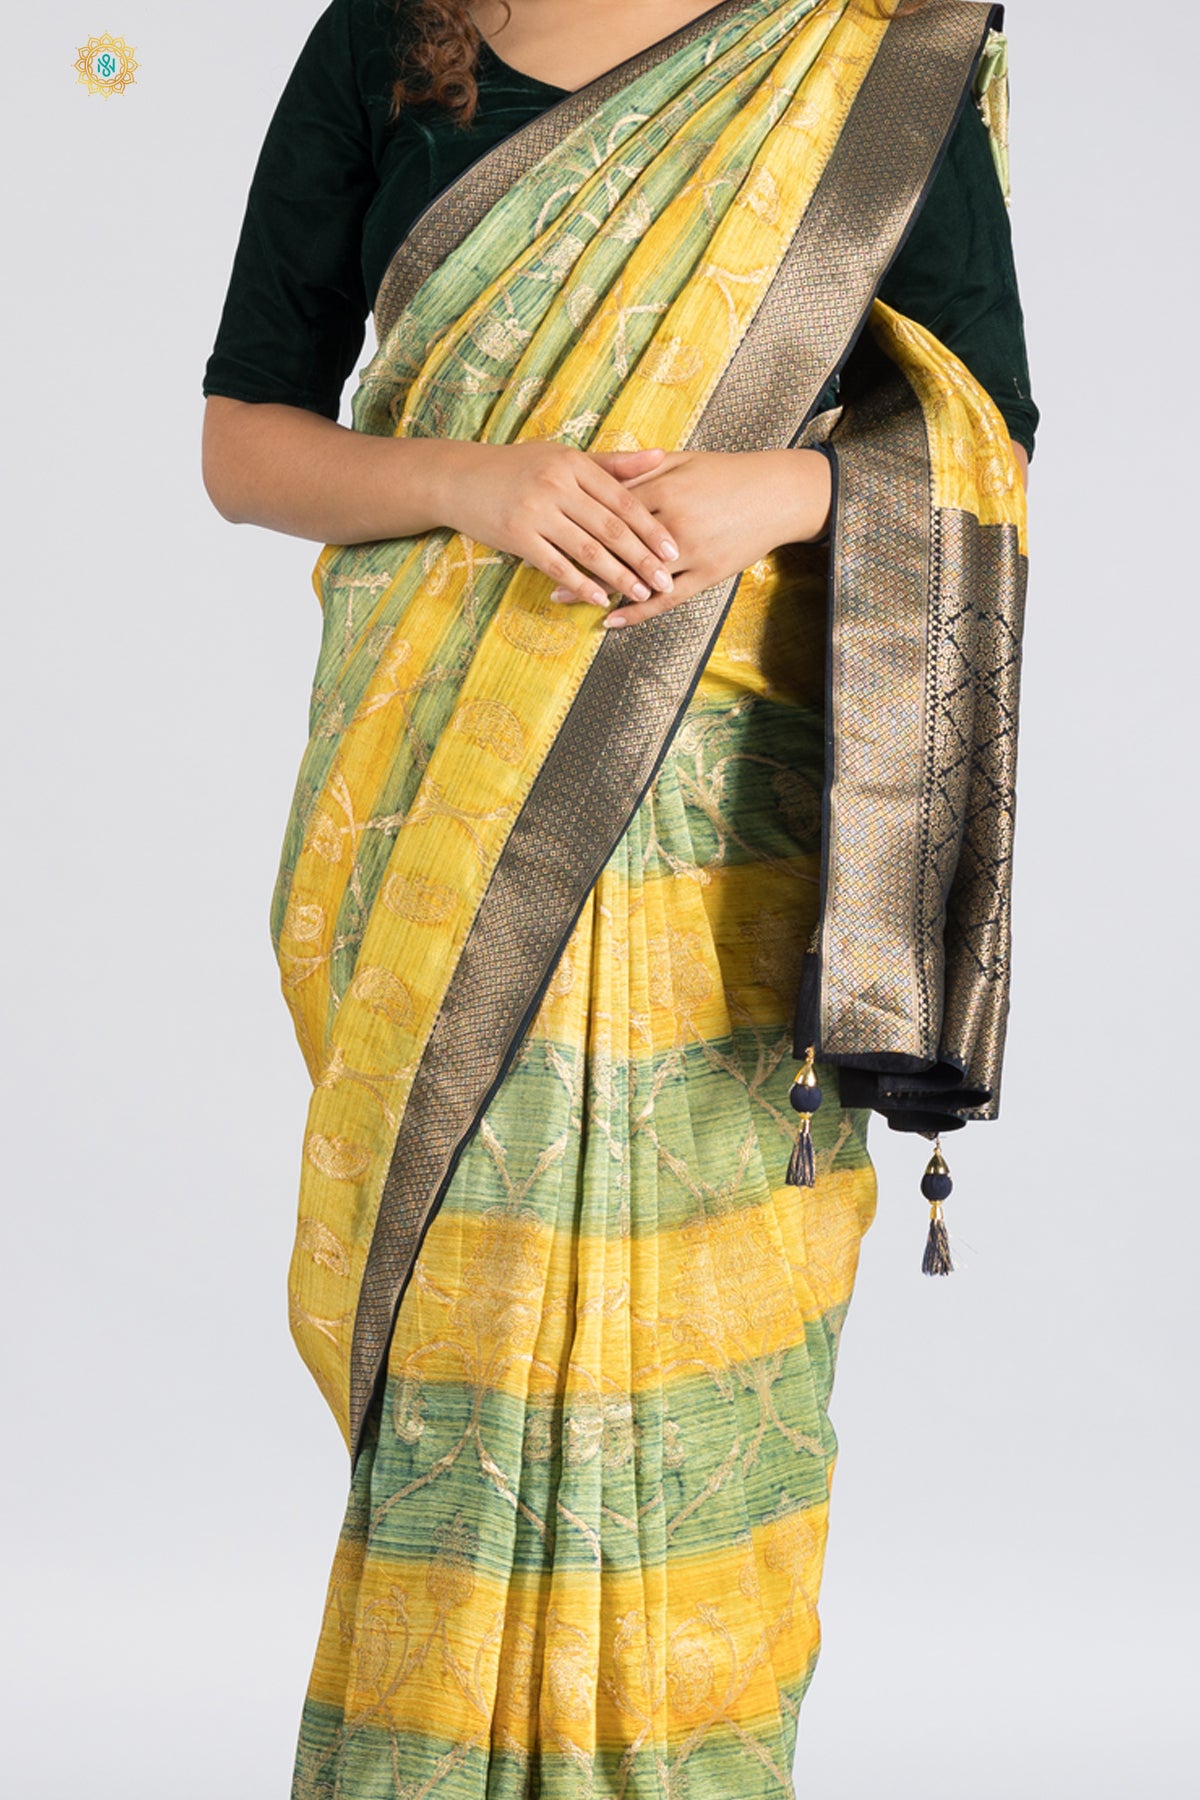 YELLOW & GREEN WITH BLACK - DOLA SILK WITH ZARI WOVEN PATTERN ON THE BODY & CONTRAST BLOUSE